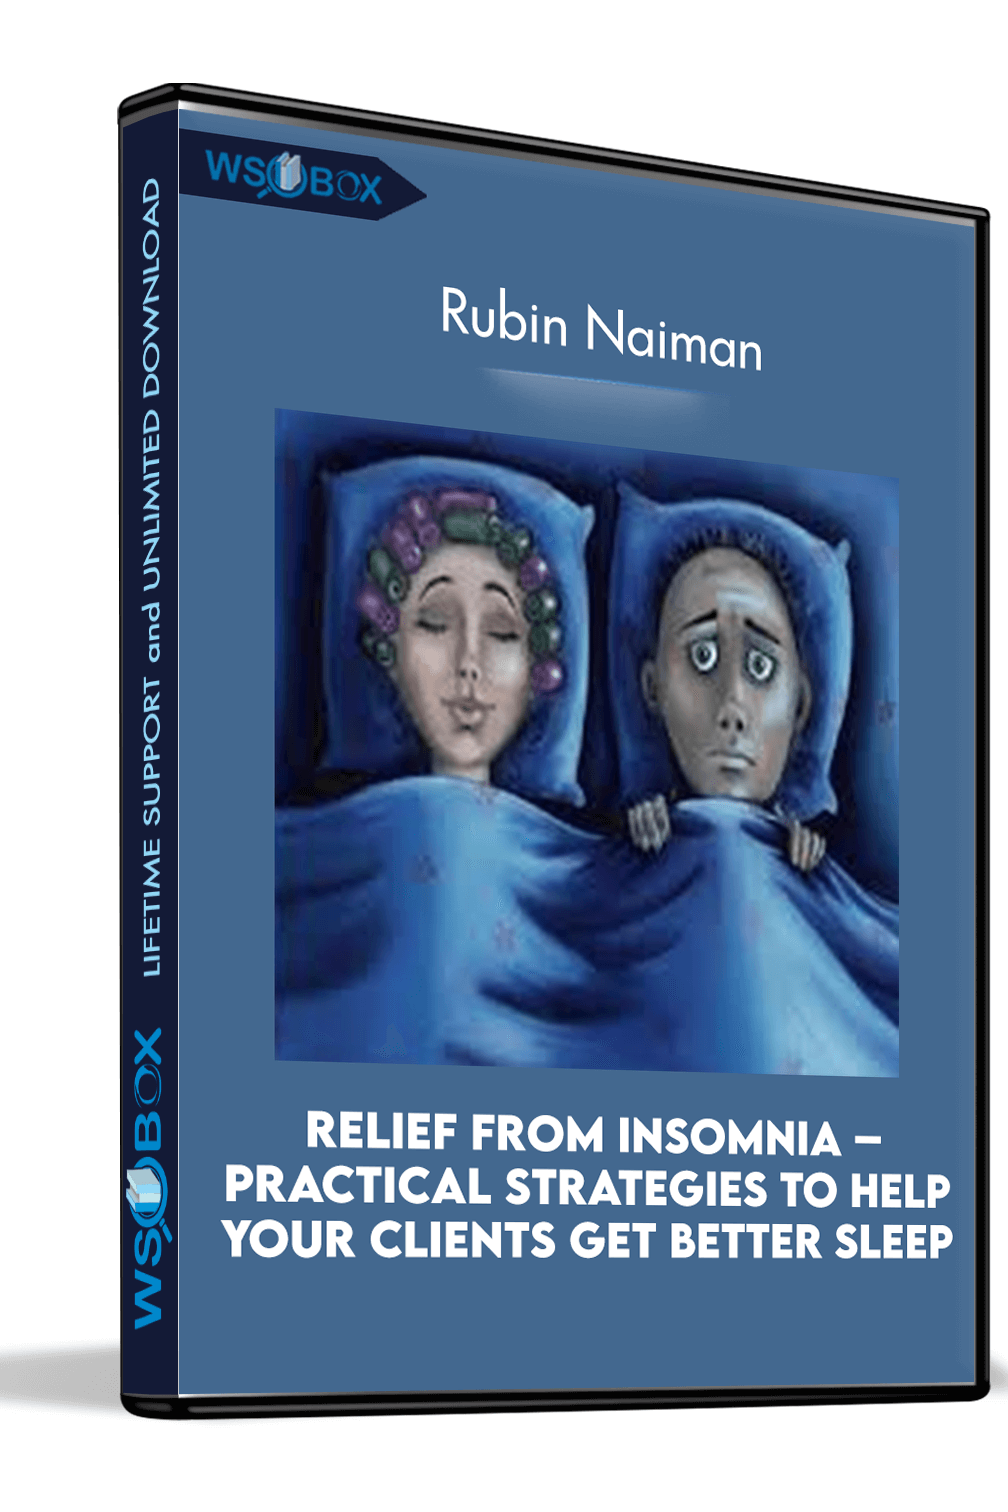 relief-from-insomnia-practical-strategies-to-help-your-clients-get-better-sleep-rubin-naiman